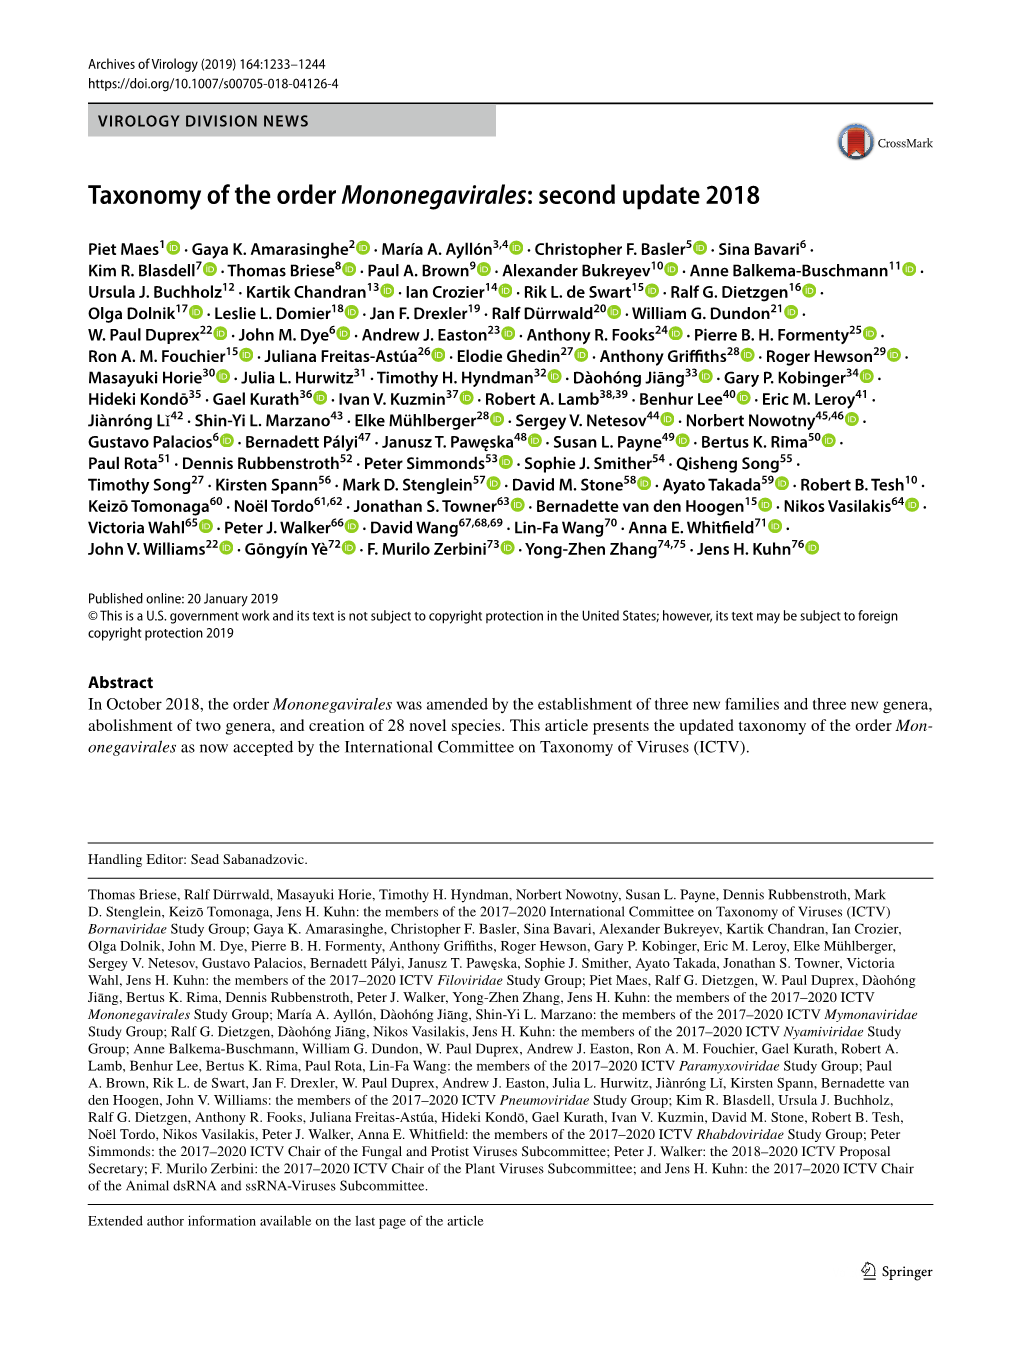 Taxonomy of the Order Mononegavirales: Second Update 2018